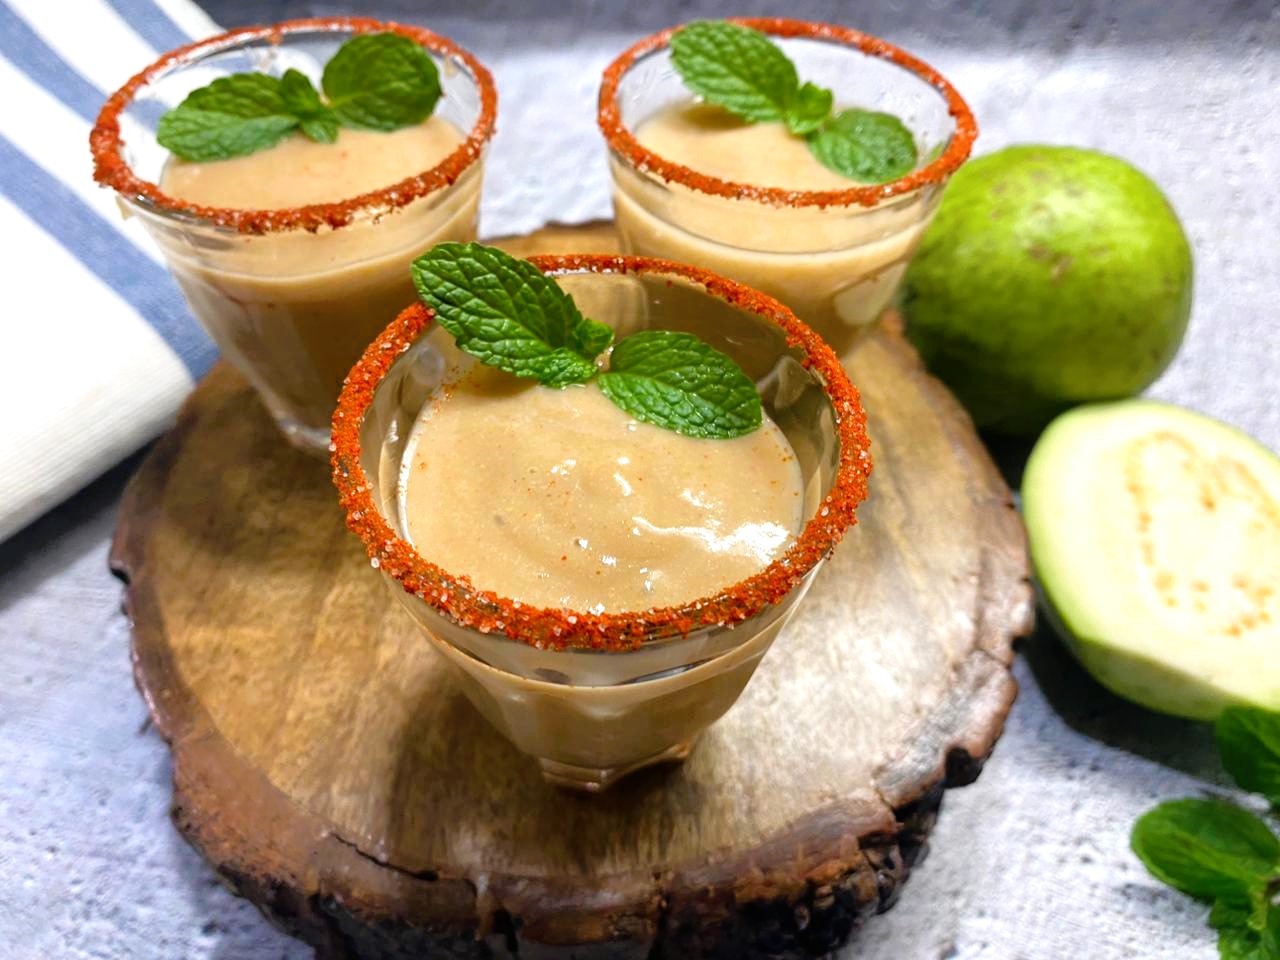 Spiced Guava Shots